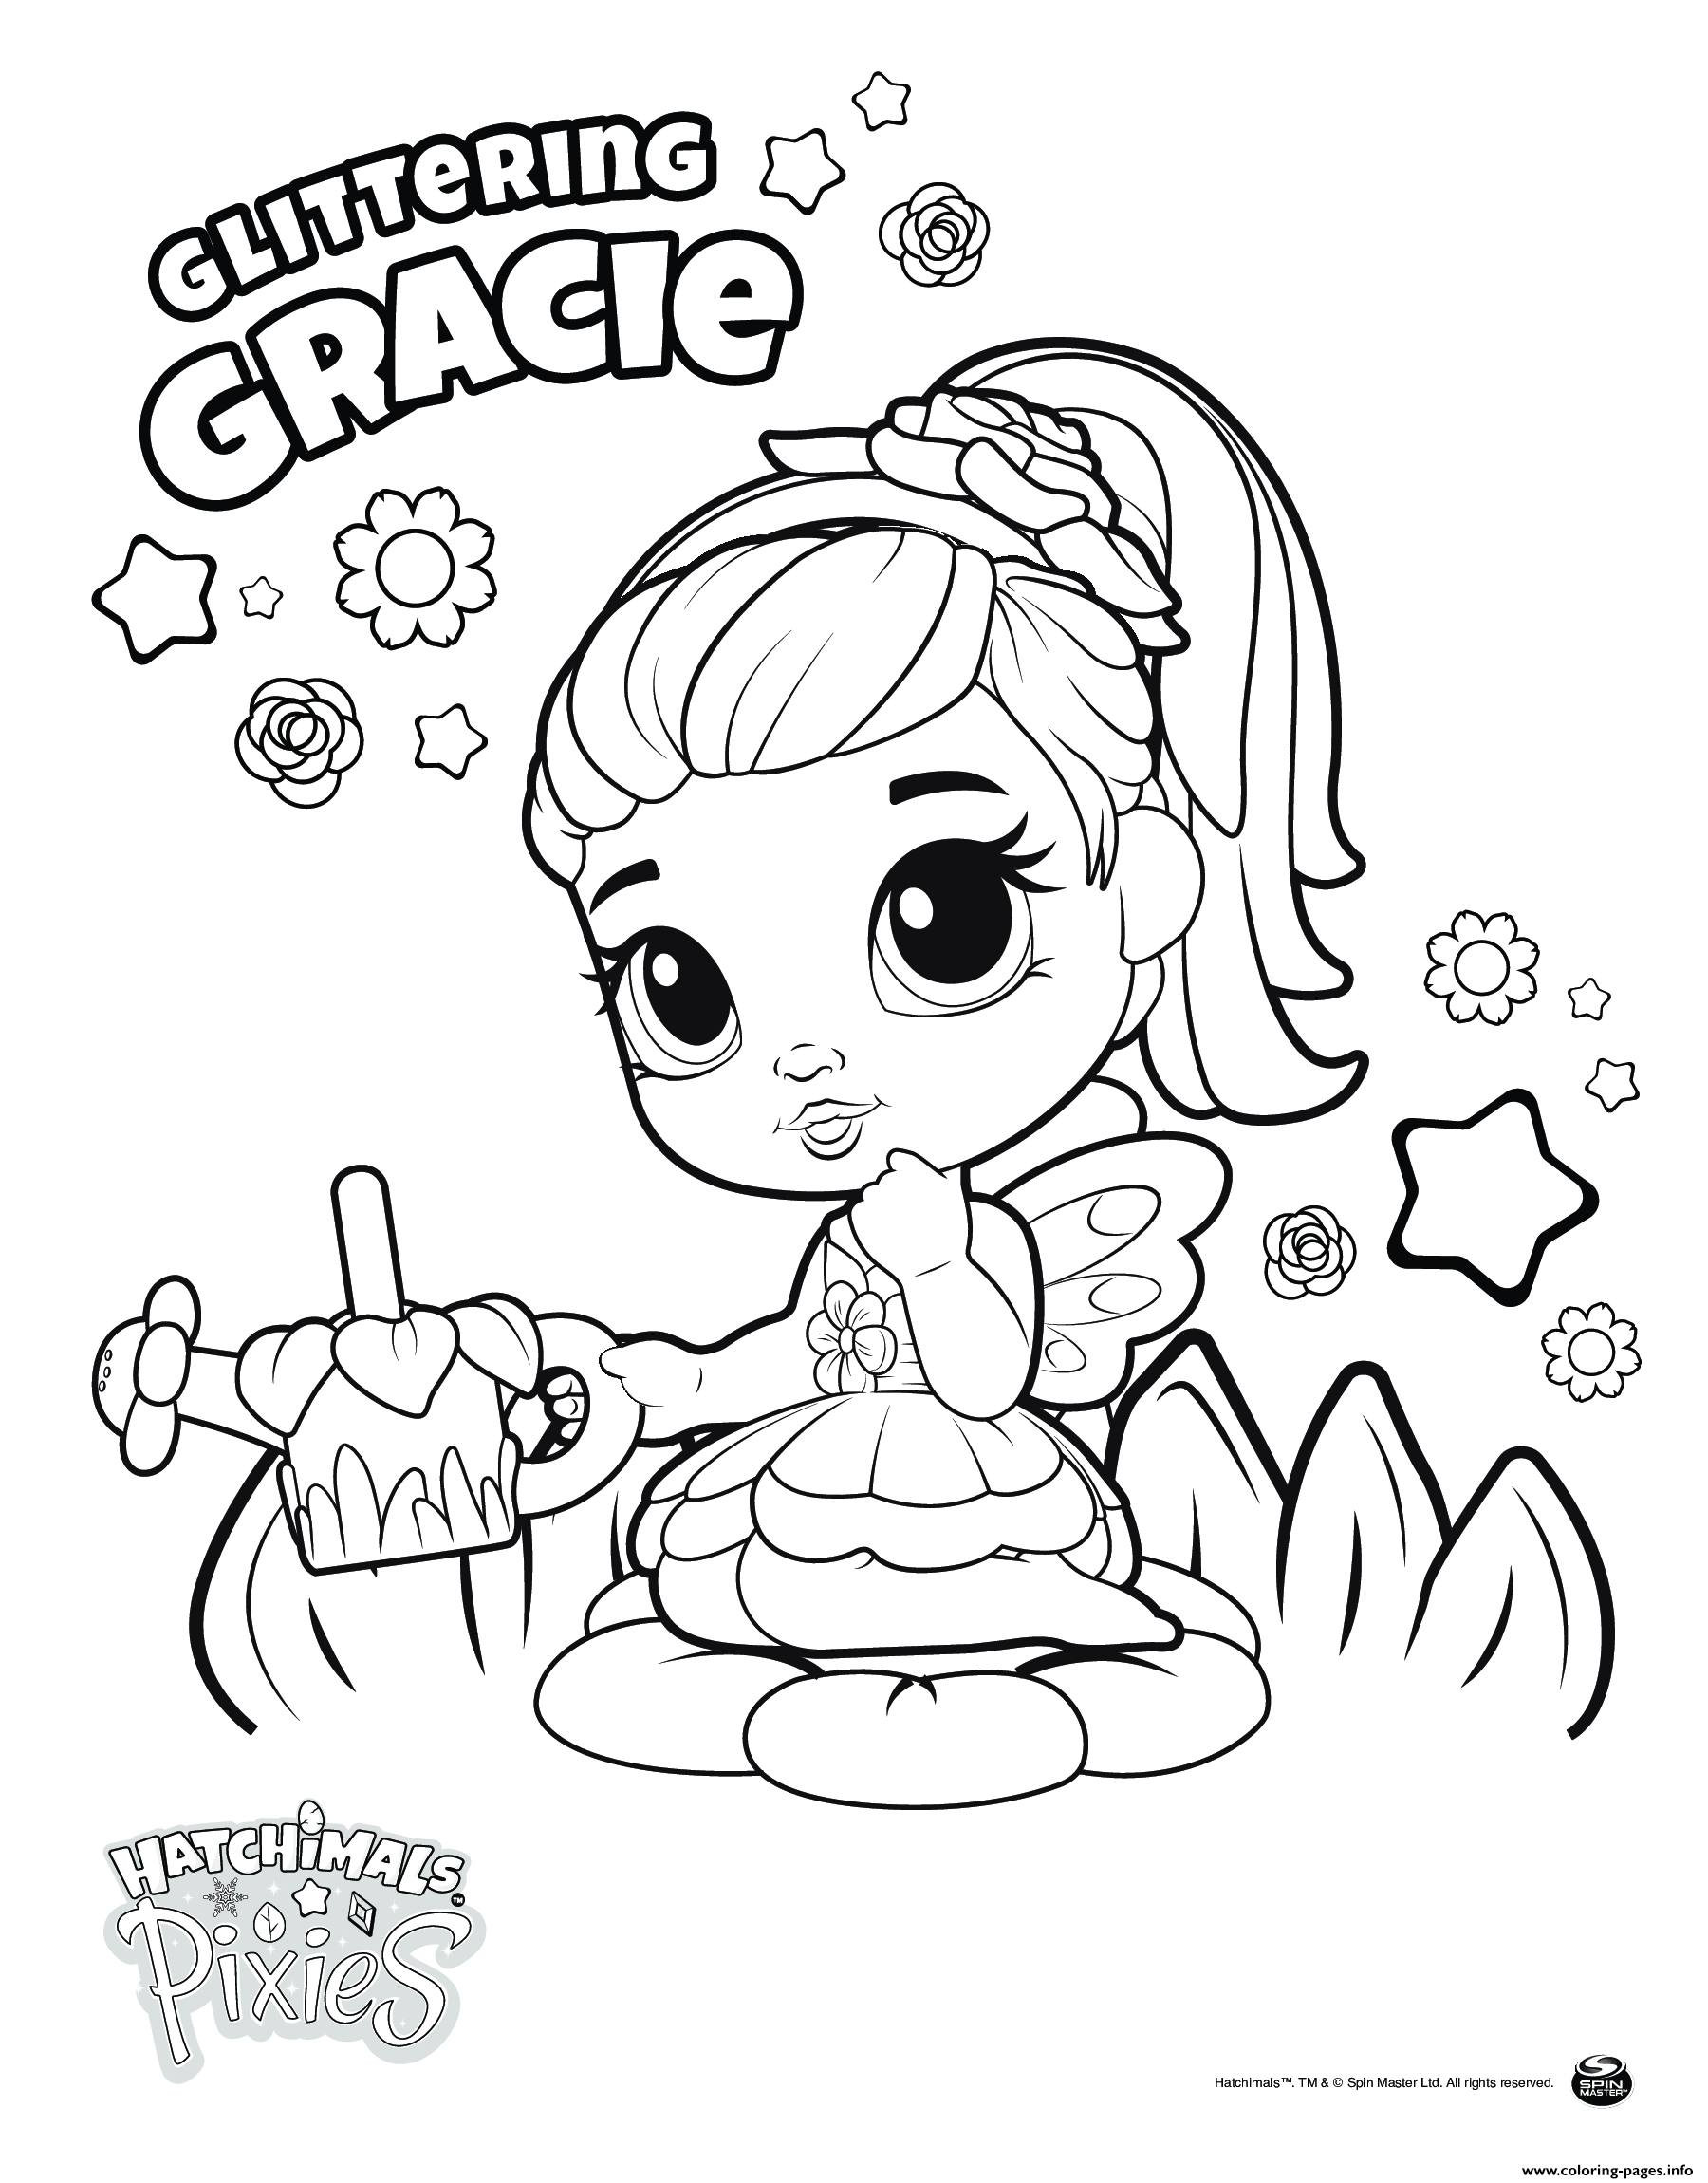 Hatchimals Pixies Girl Gracie Coloring Pages Printable